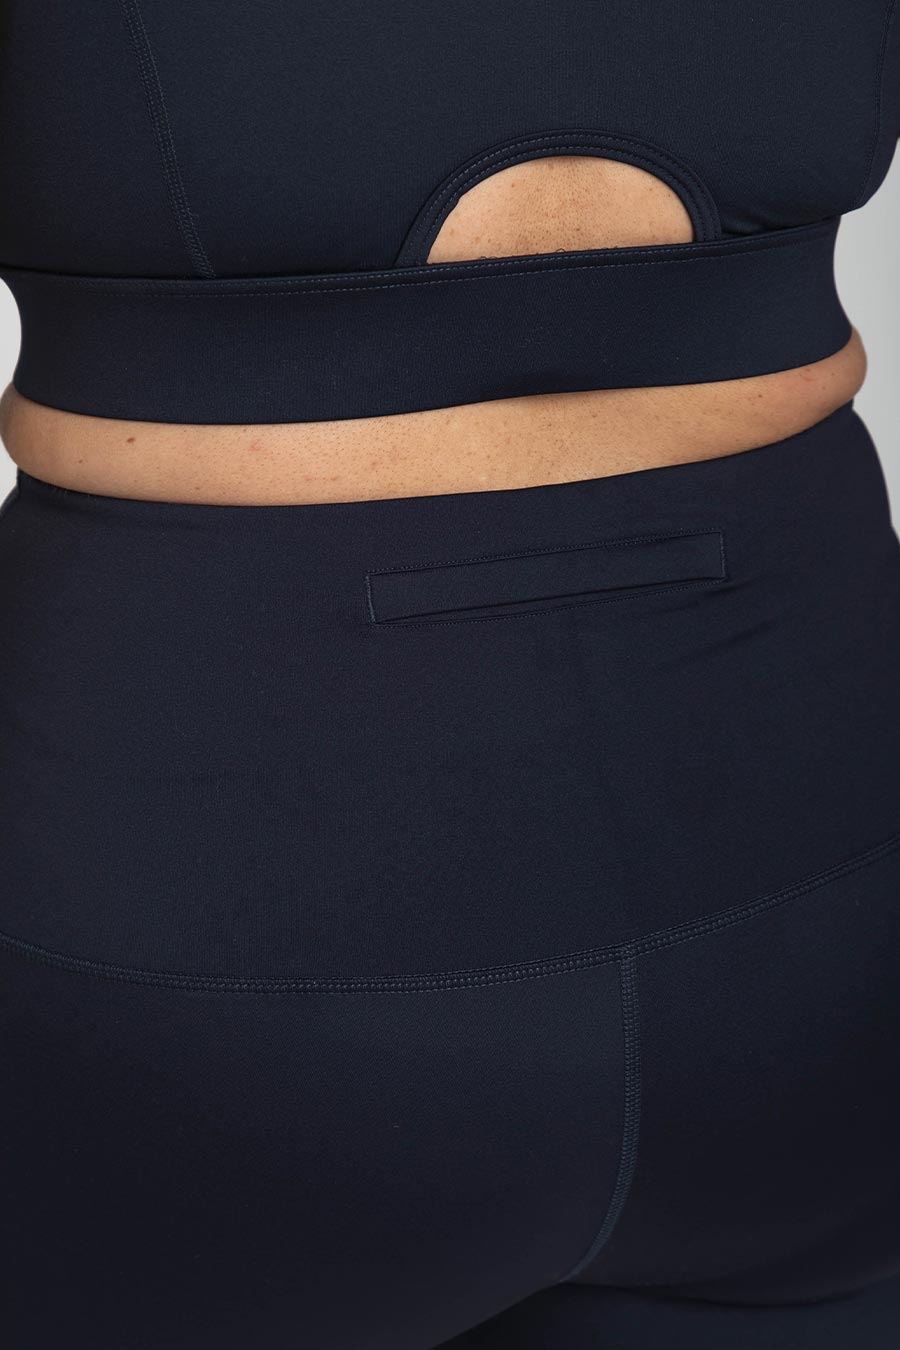 Ultra High Waist 7/8 Tight in Navy, Gym Tights